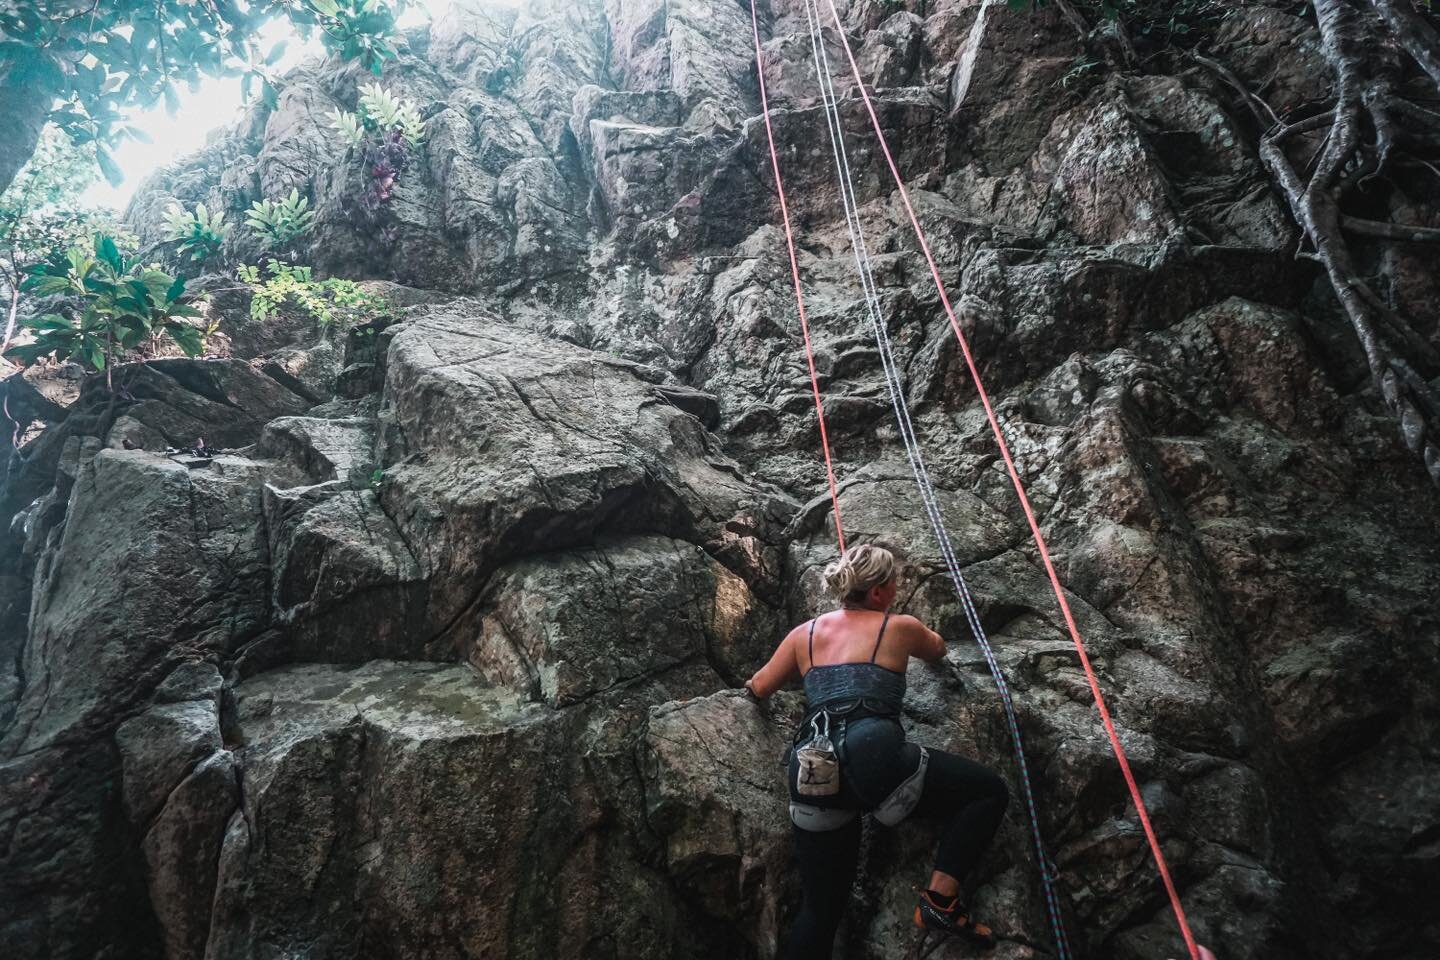 One of the best parts of living abroad is the personal growth that takes place. 

Every day you learn new skills and by going outside of your comfort zone you&rsquo;ll continue to grow and evolve as a person. 

&hellip;

Rock climbing at @goodtimetha